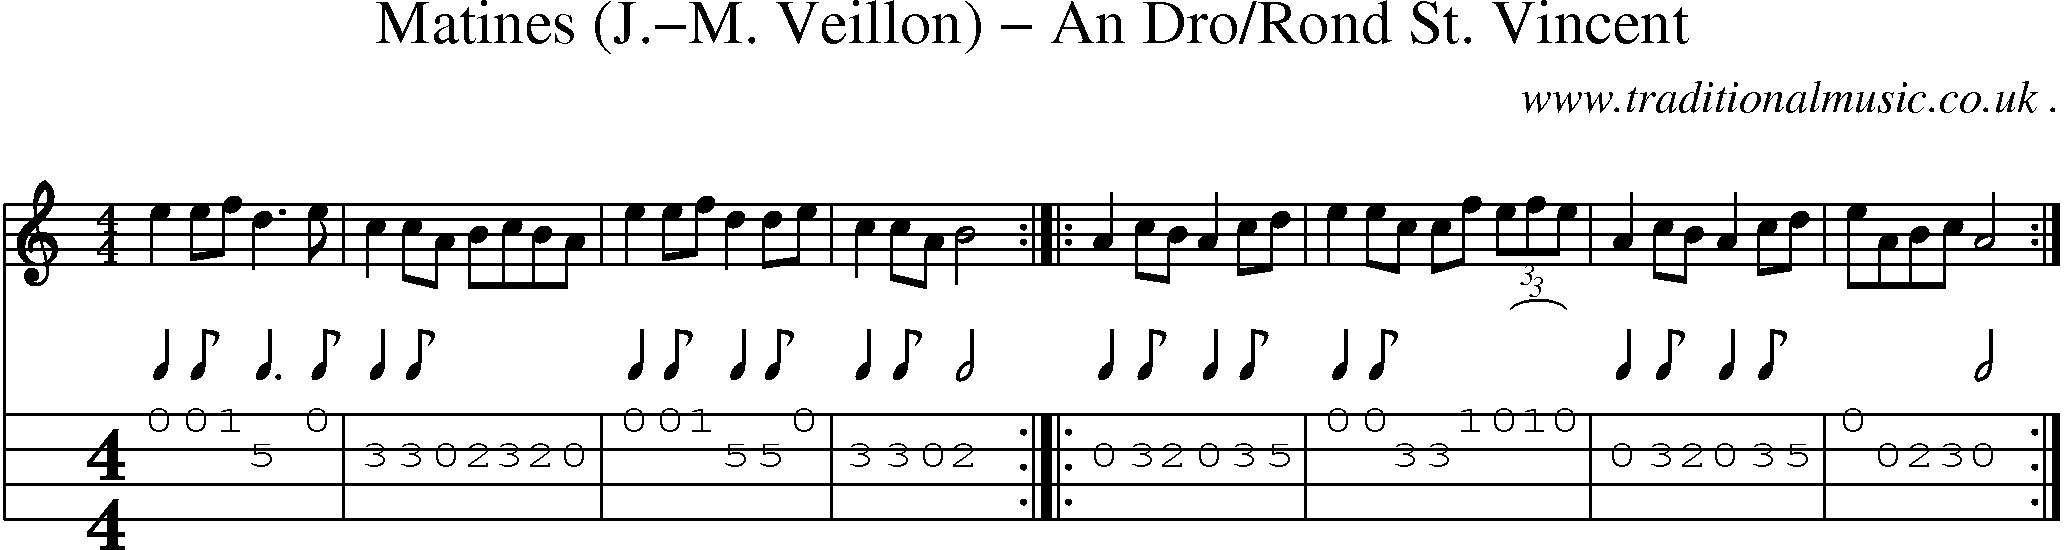 Sheet-Music and Mandolin Tabs for Matines (j-m Veillon) An Drorond St Vincent